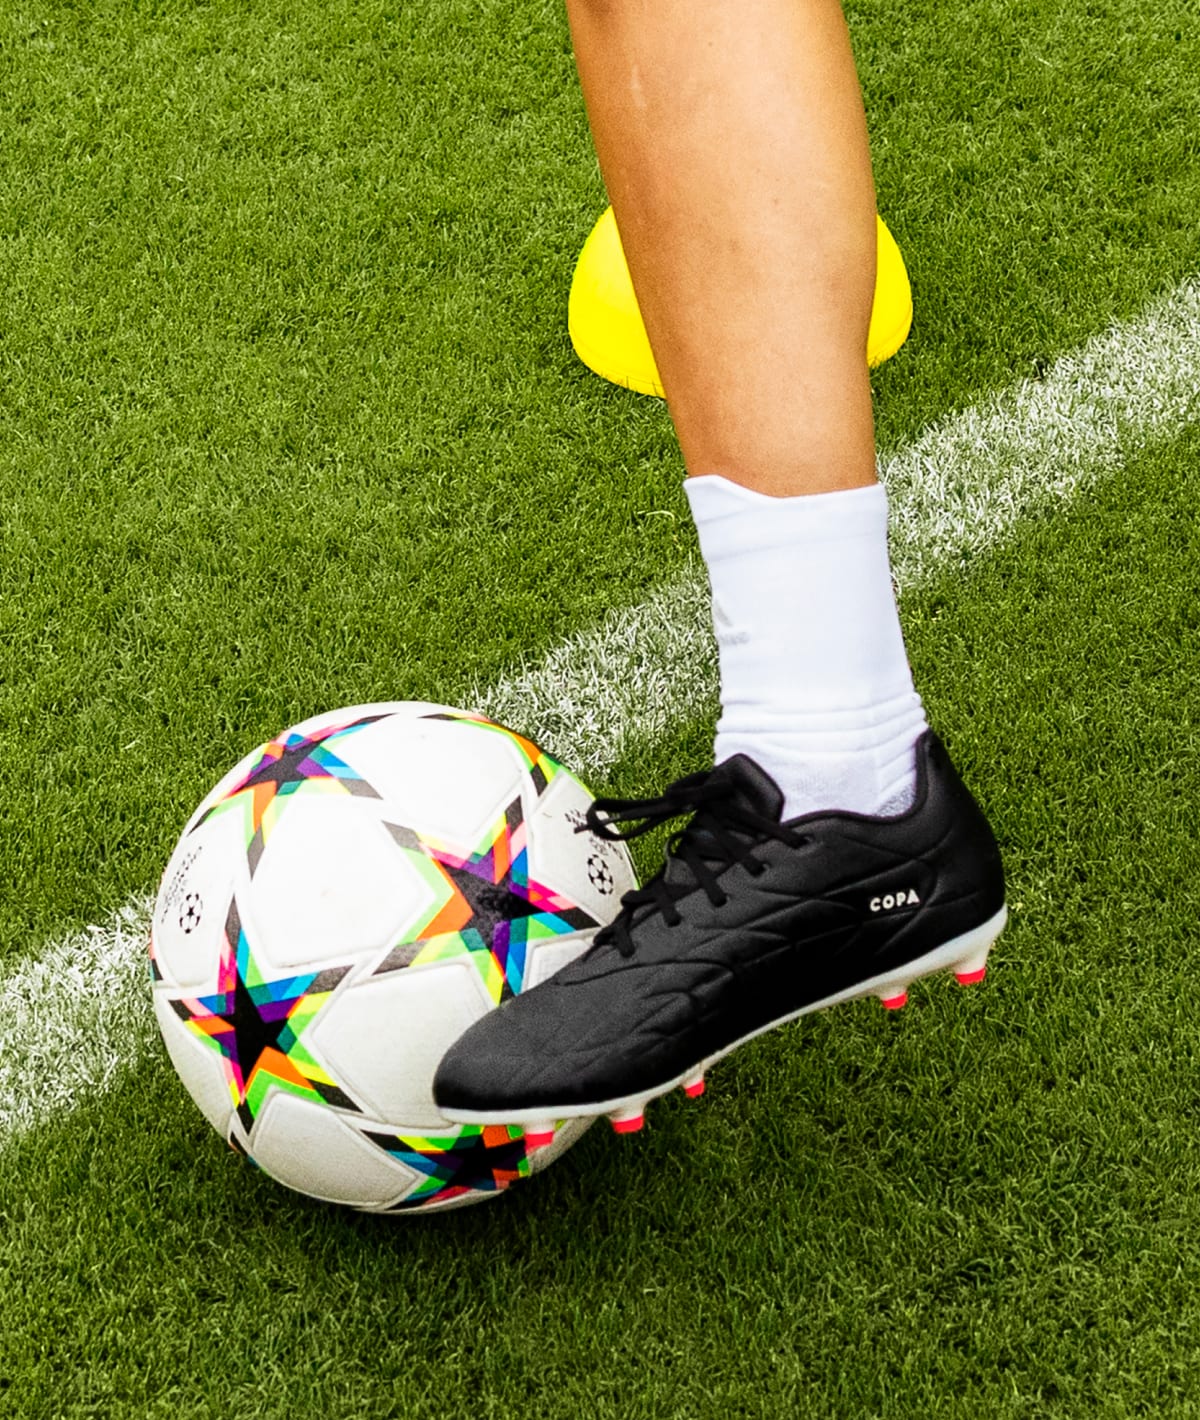 Who Are Ya Soccer? A Comprehensive Guide About The Popular Sport Game